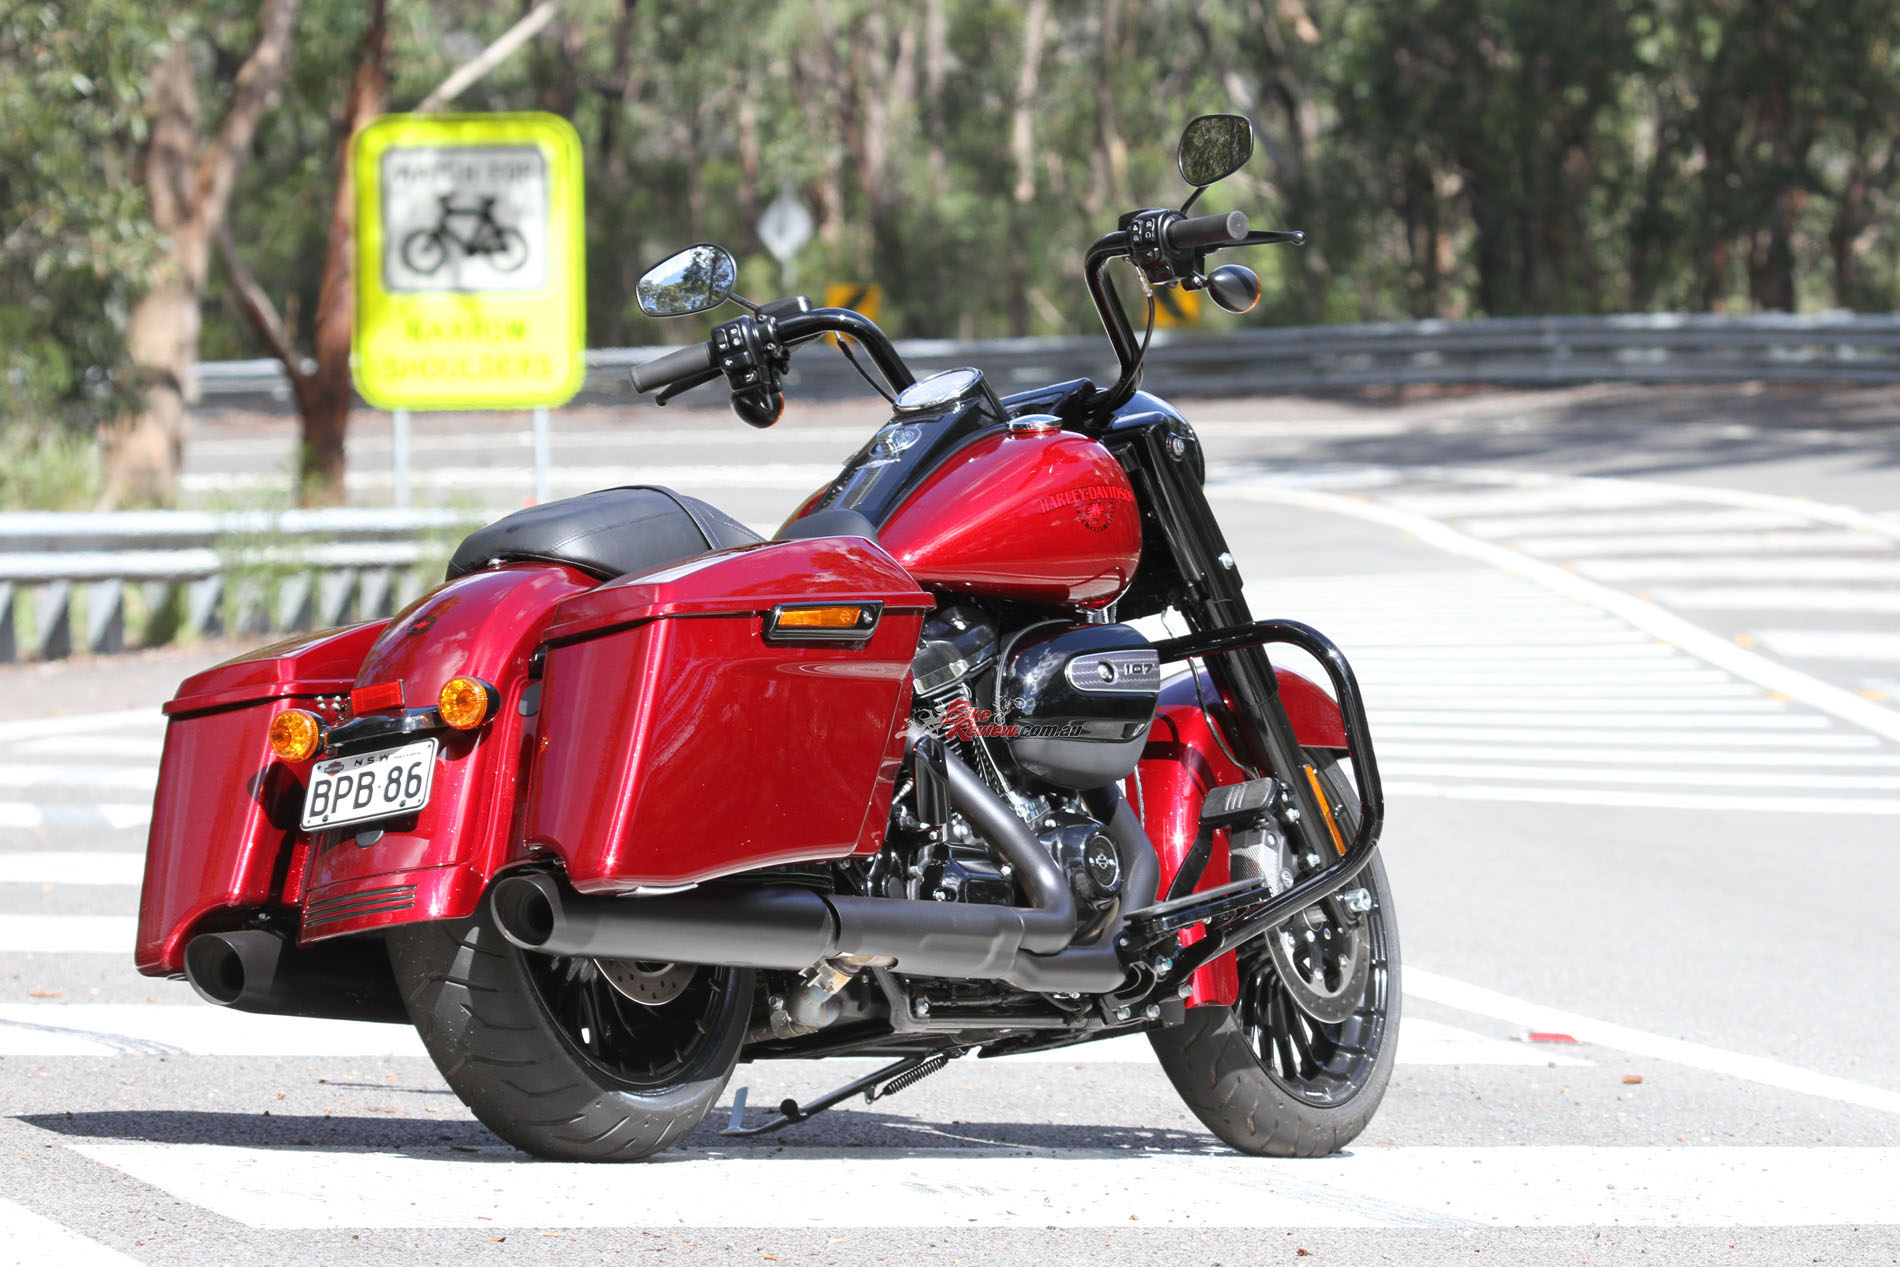 With the new powerplant the Road King offers considerably less heat to the rider and pillion, as well as less vibrations